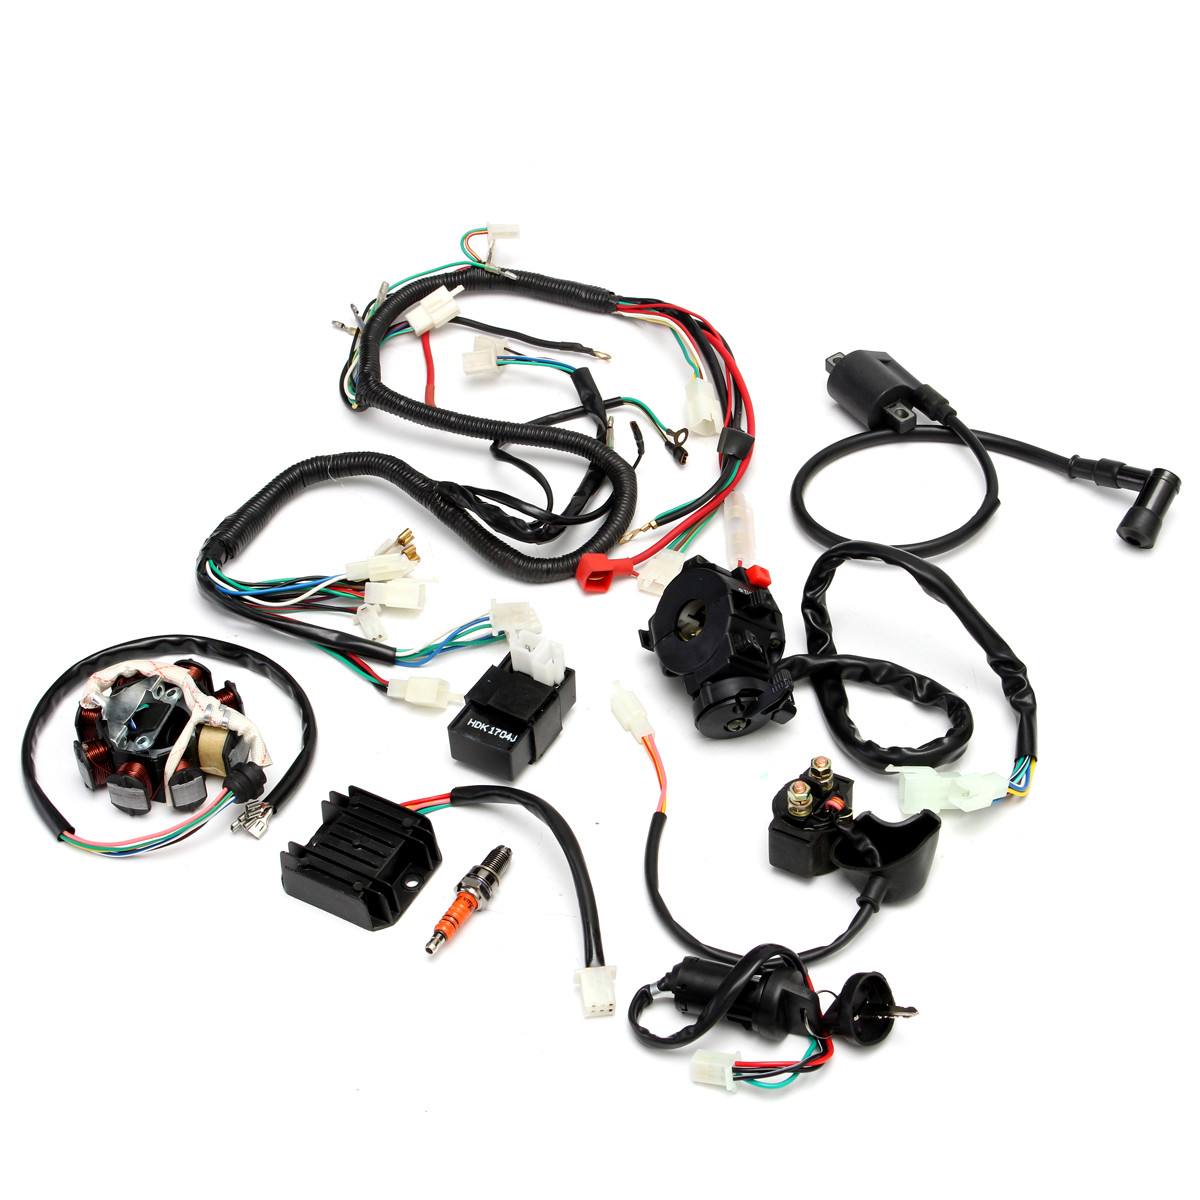 Complete Electrics Wiring Harness for Chinese Dirt Bike ATV QUAD 150-250 300CC